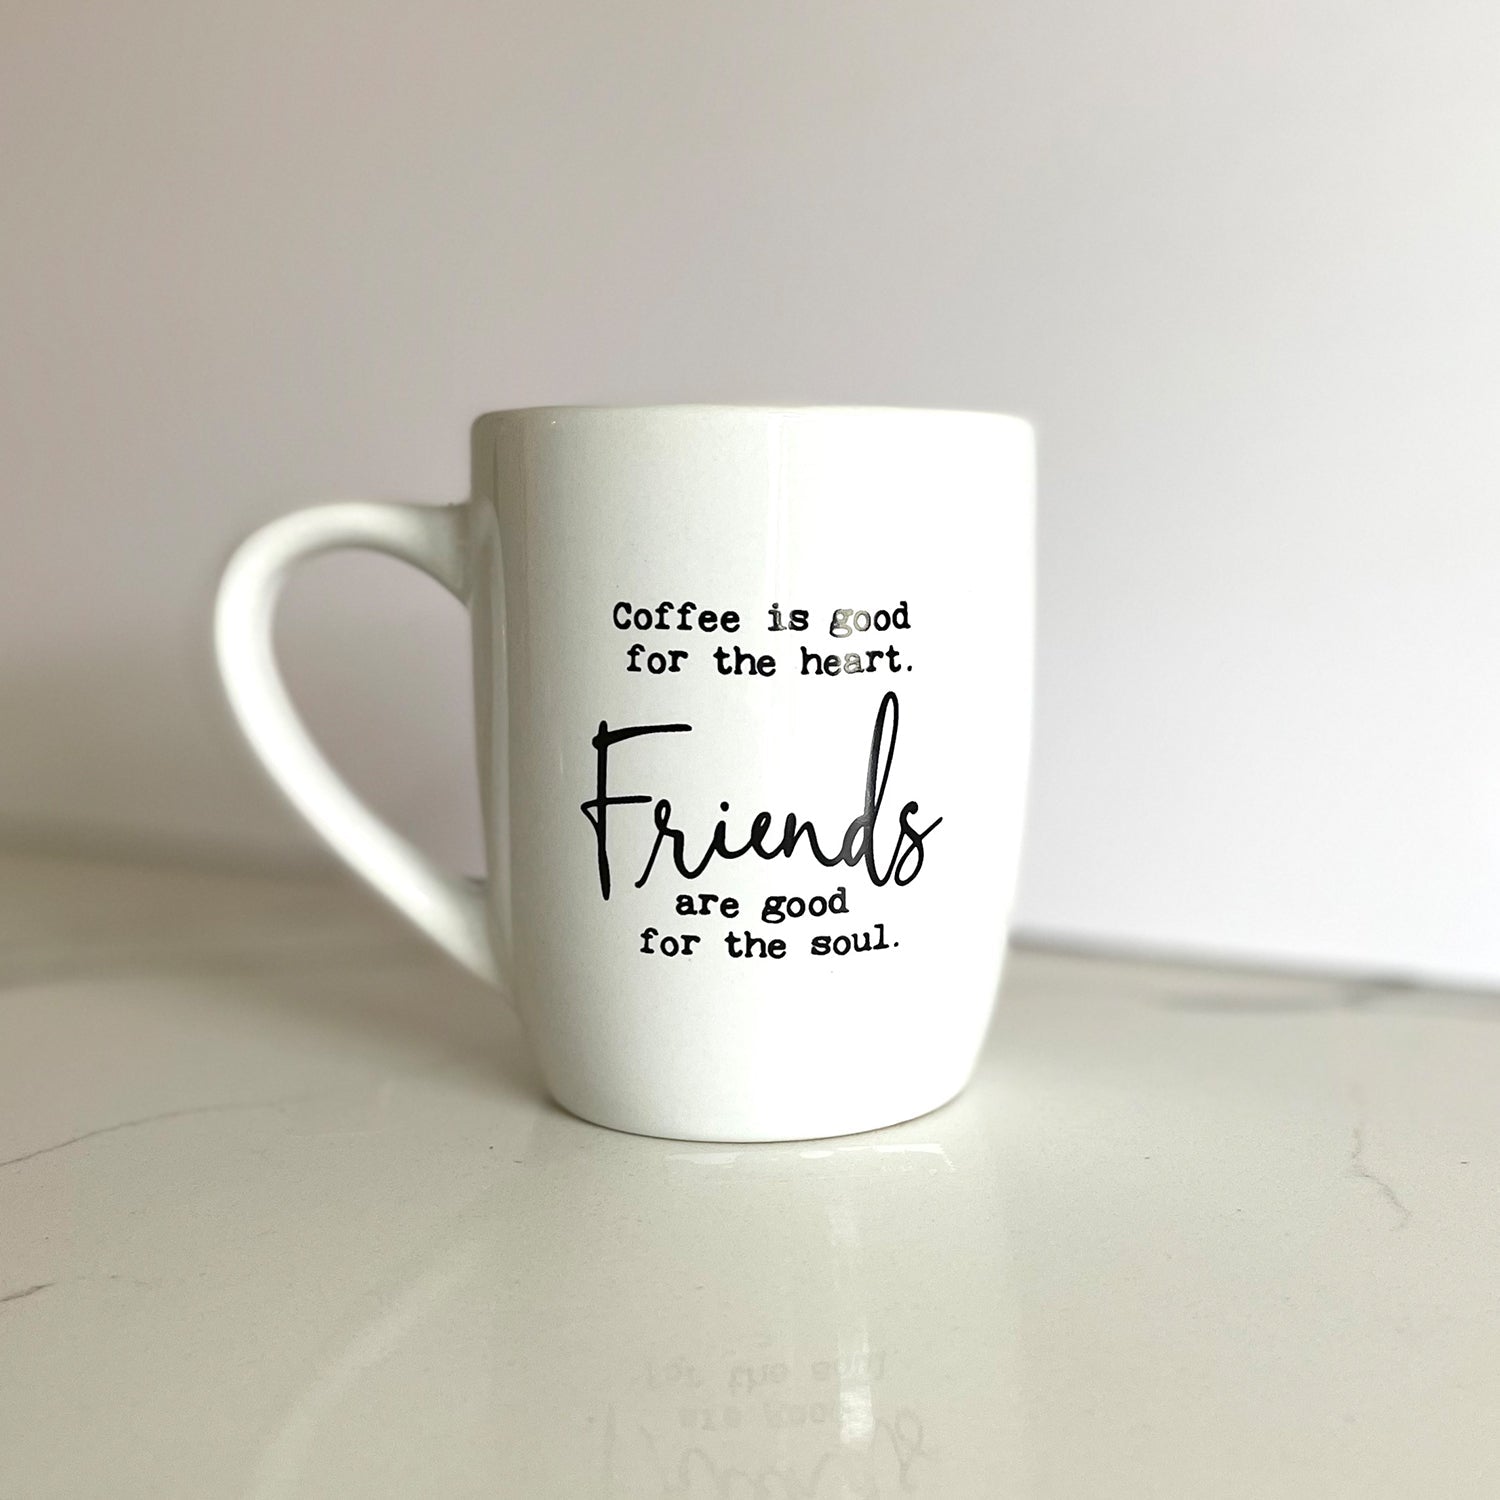 Coffee is good for the heart. Friends are good for the soul.